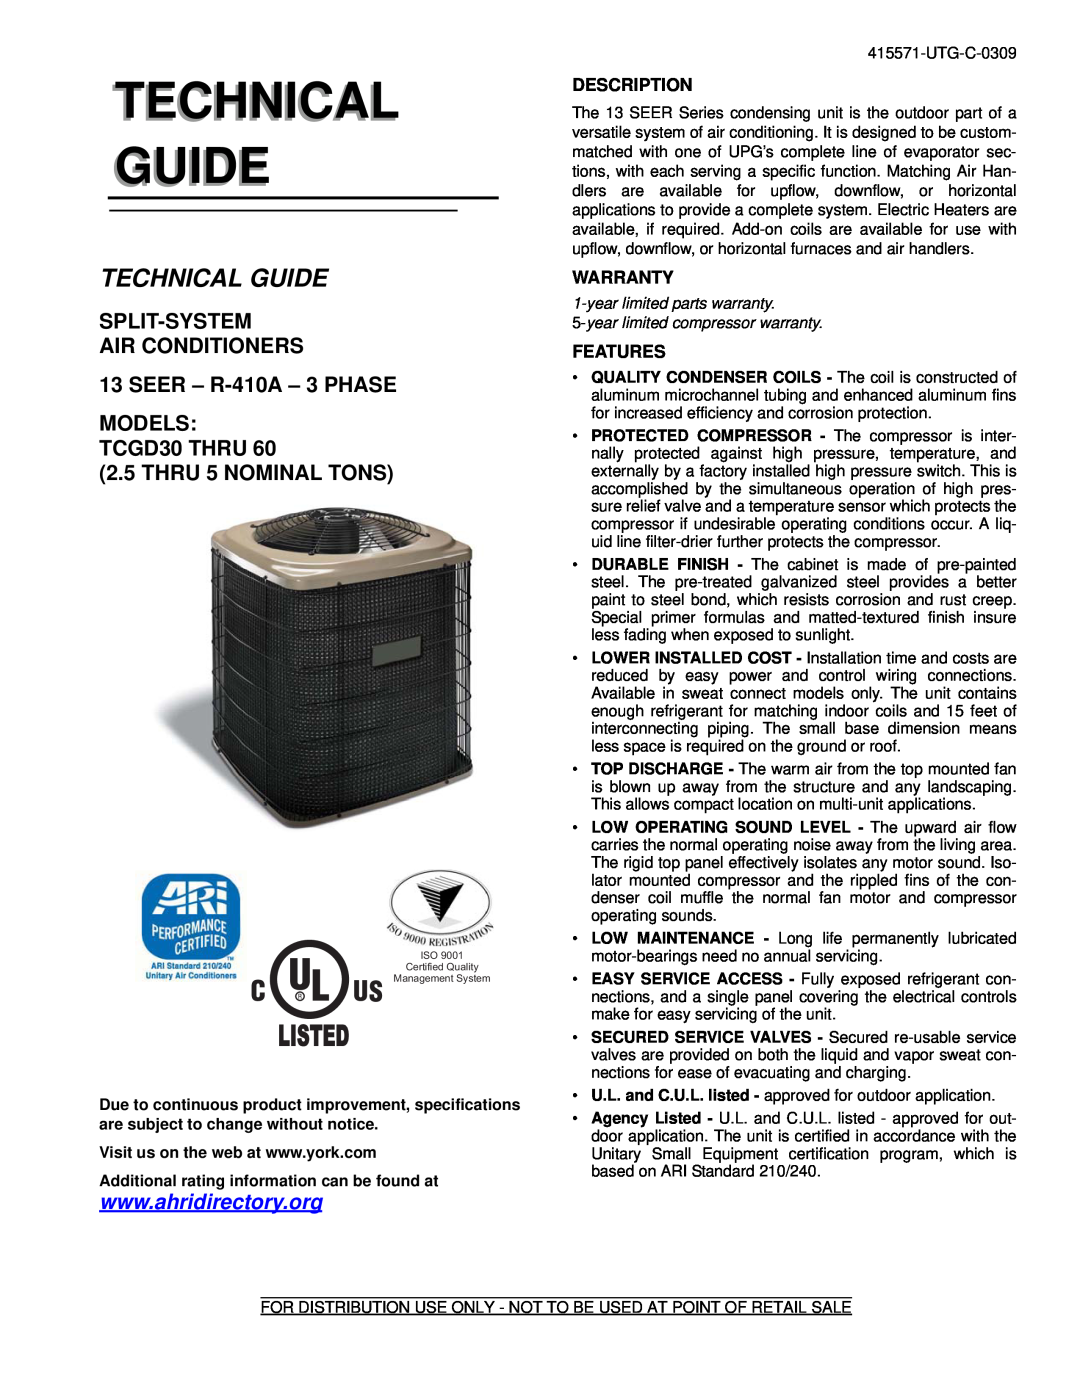 Johnson Controls TCGD30 warranty Description, Warranty, Features, Technical Guide, Listed, Split-System Air Conditioners 